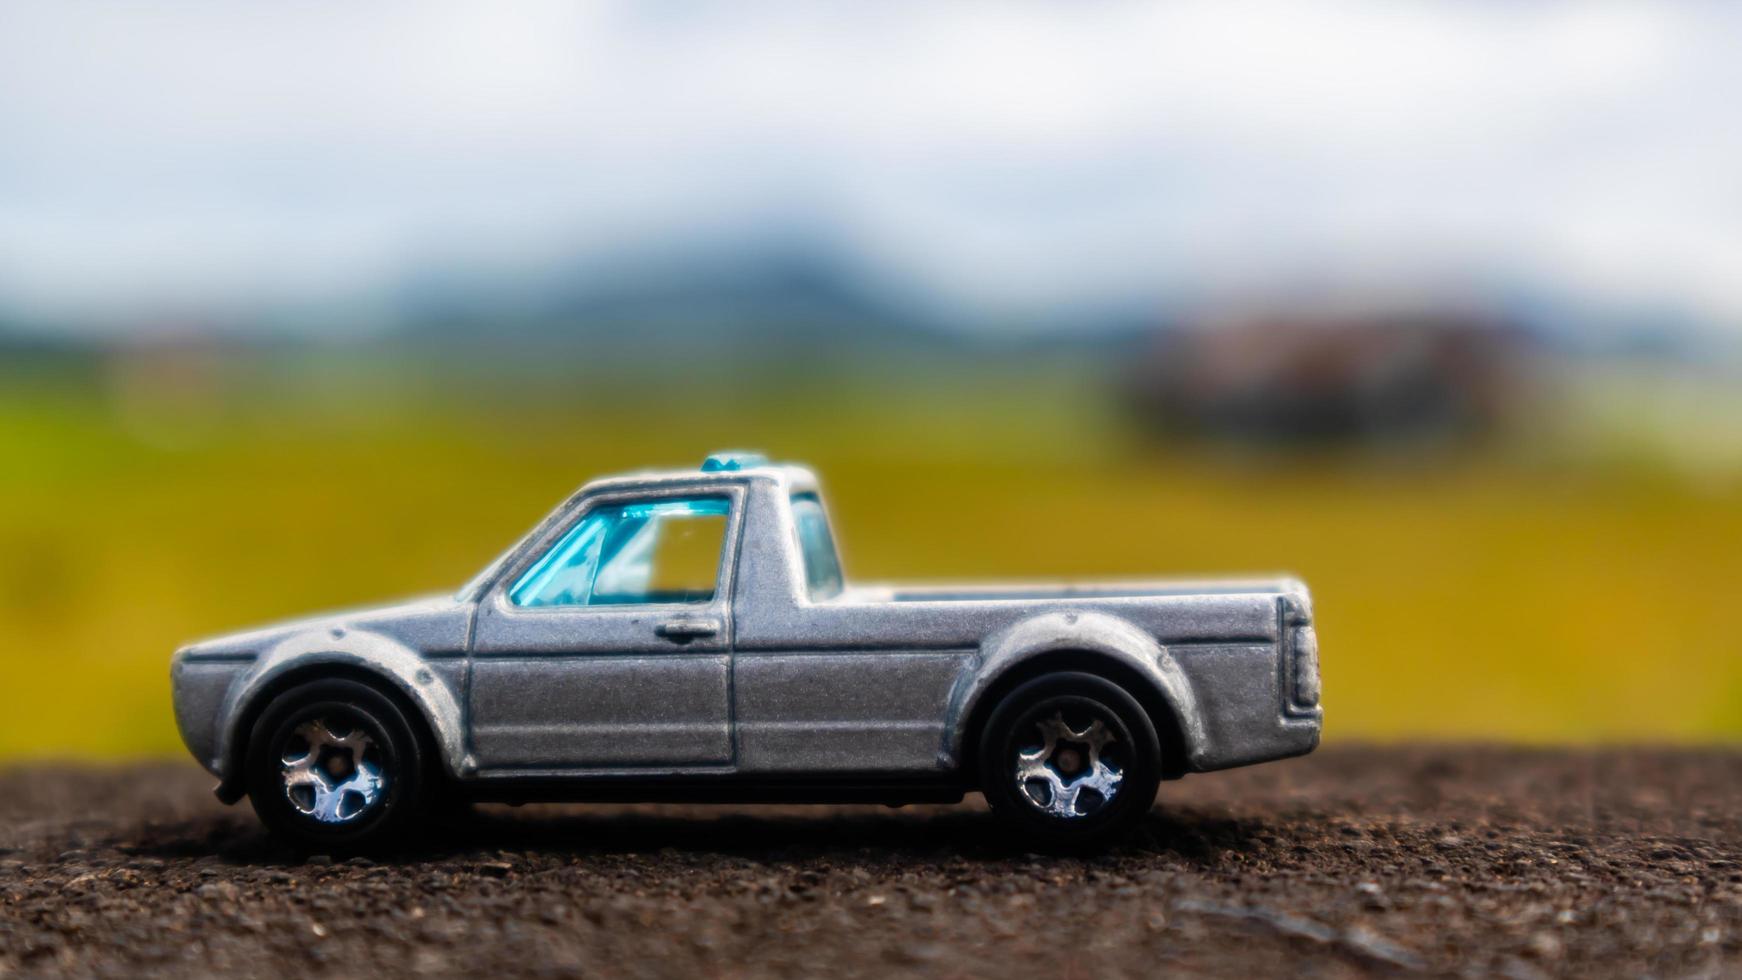 minahasa, Indonesia January 2023, toy car in the rice field photo